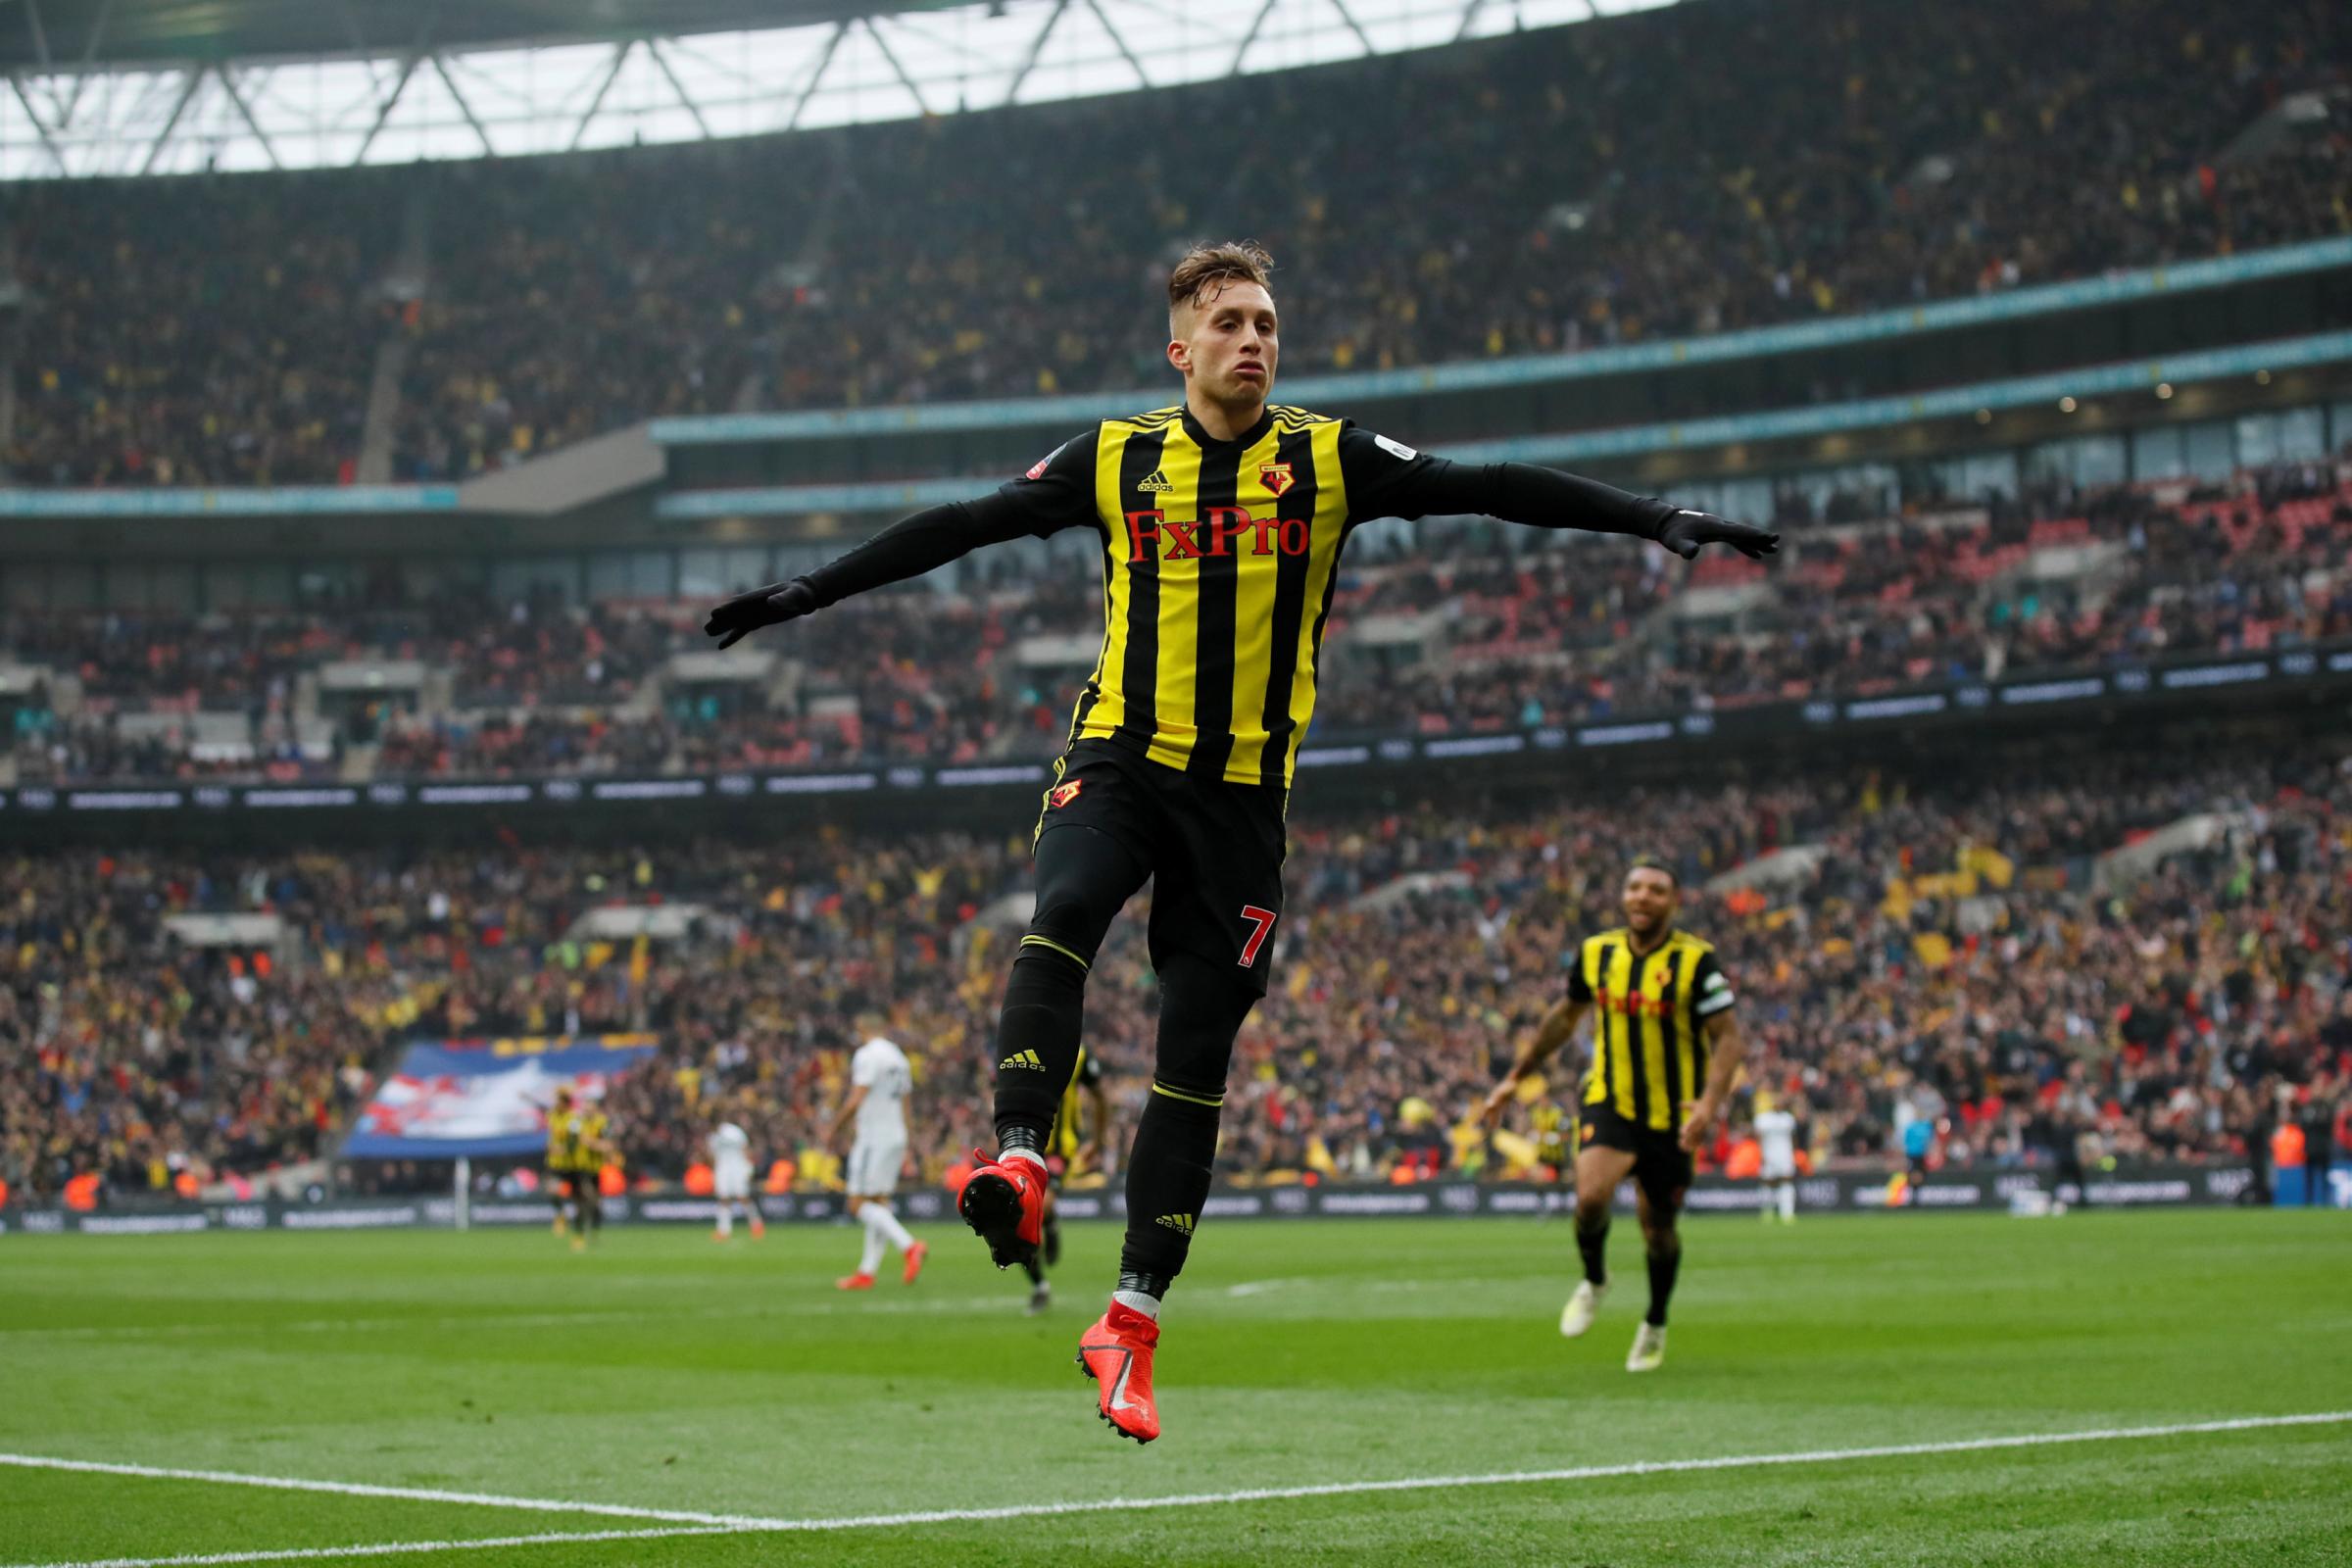 Gerard Deulofeu's loan move from Watford to Udinese is confirmed